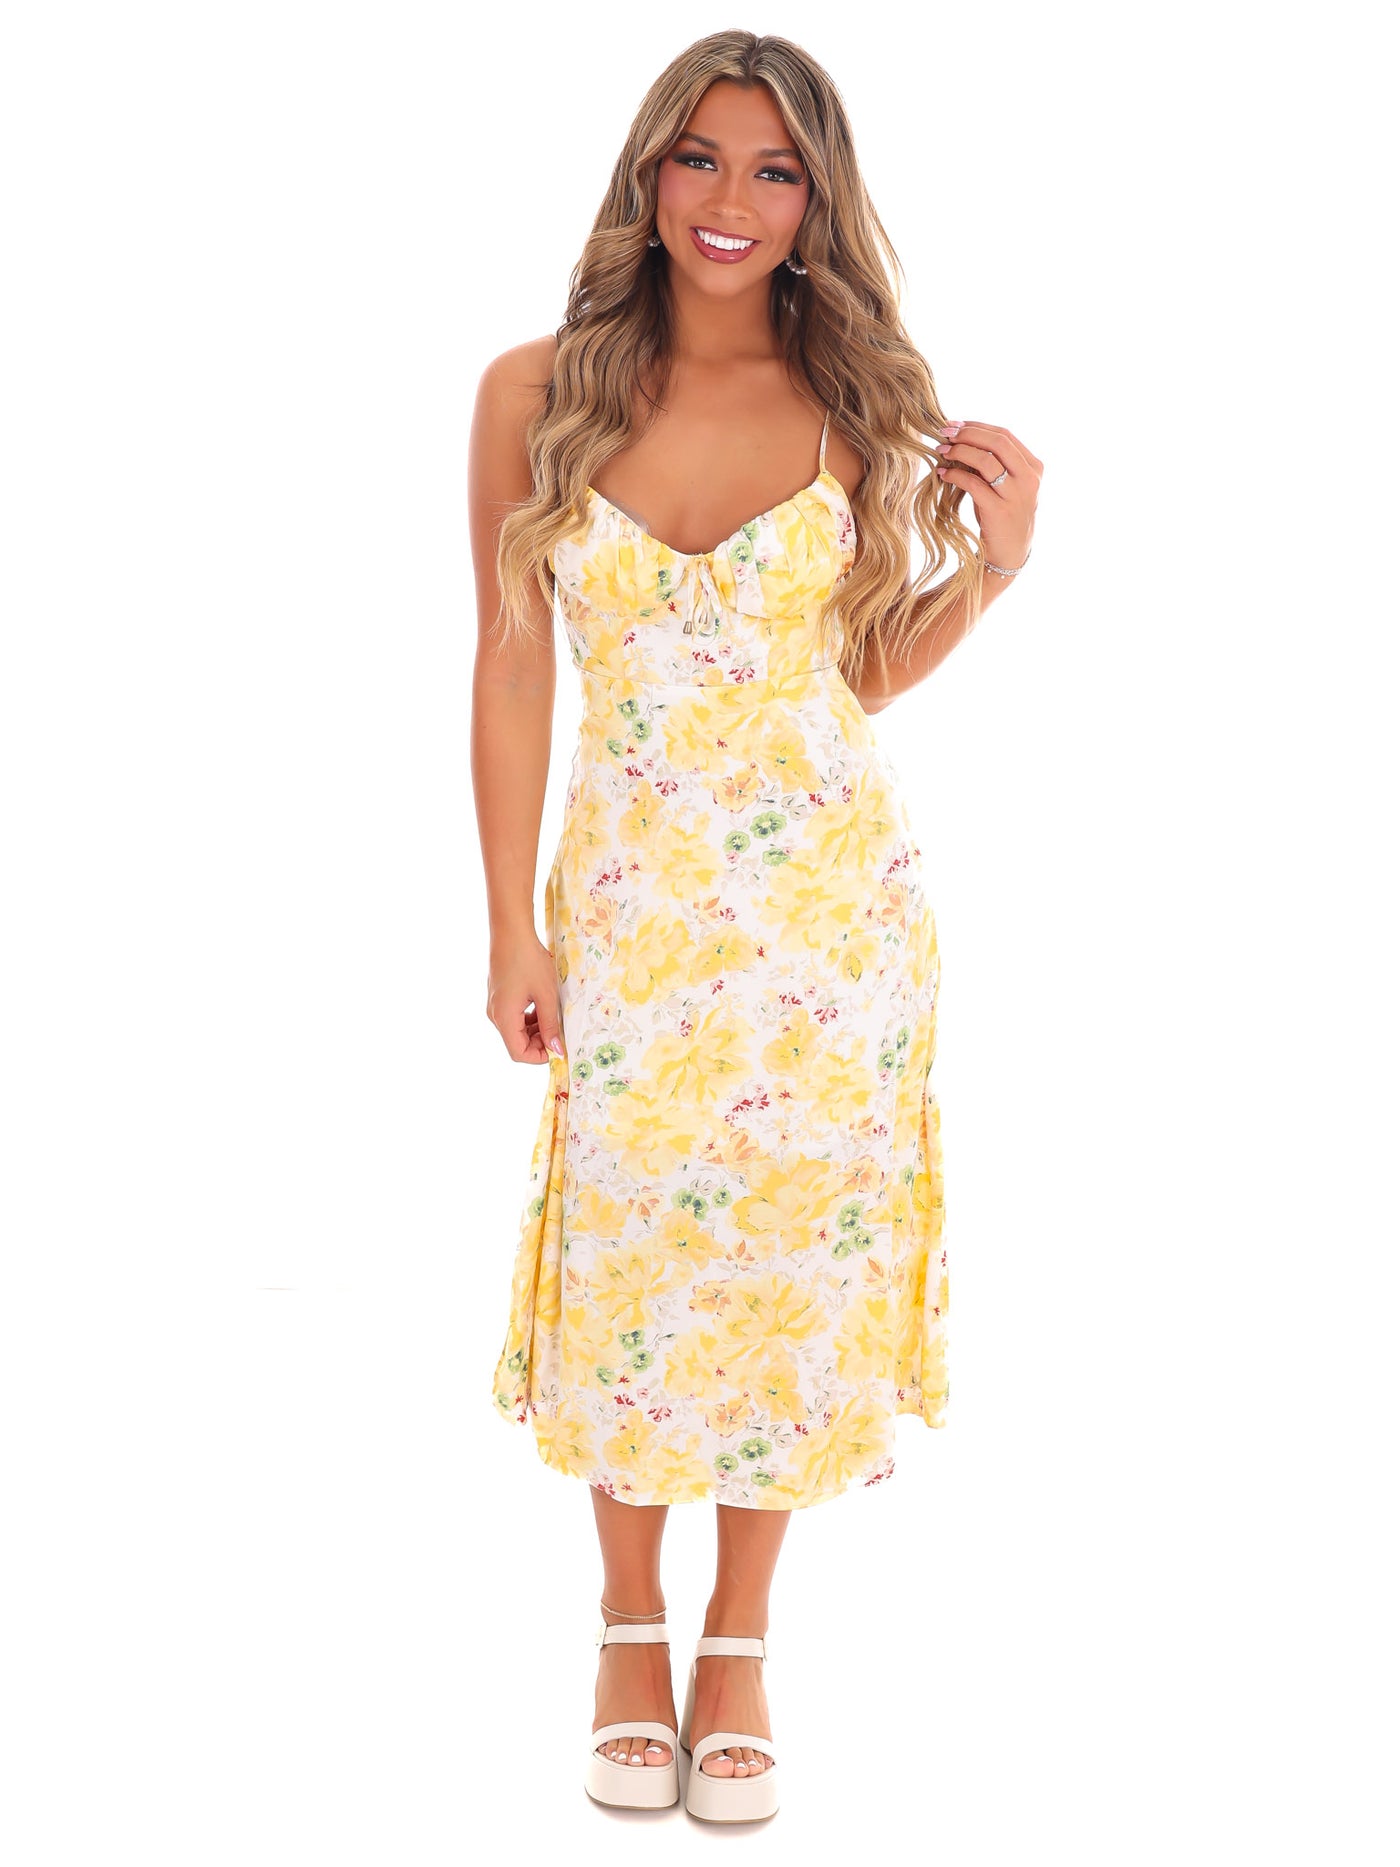 One for Me Floral Satin Midi Dress